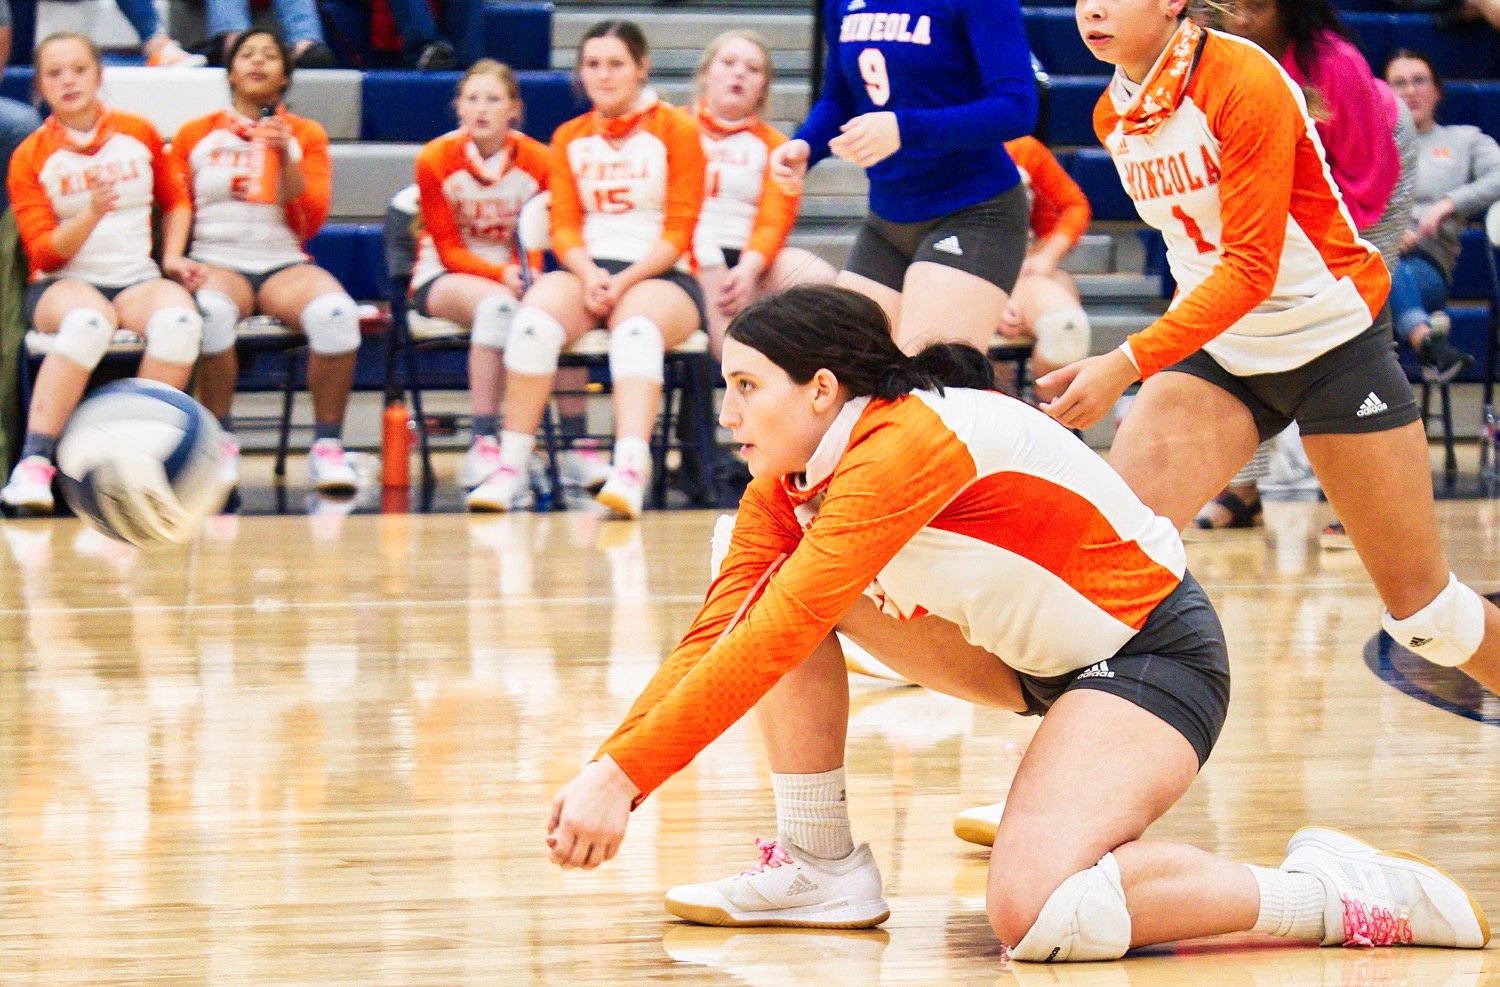 Mineola standout Brittany Pickle kneels for the dig.